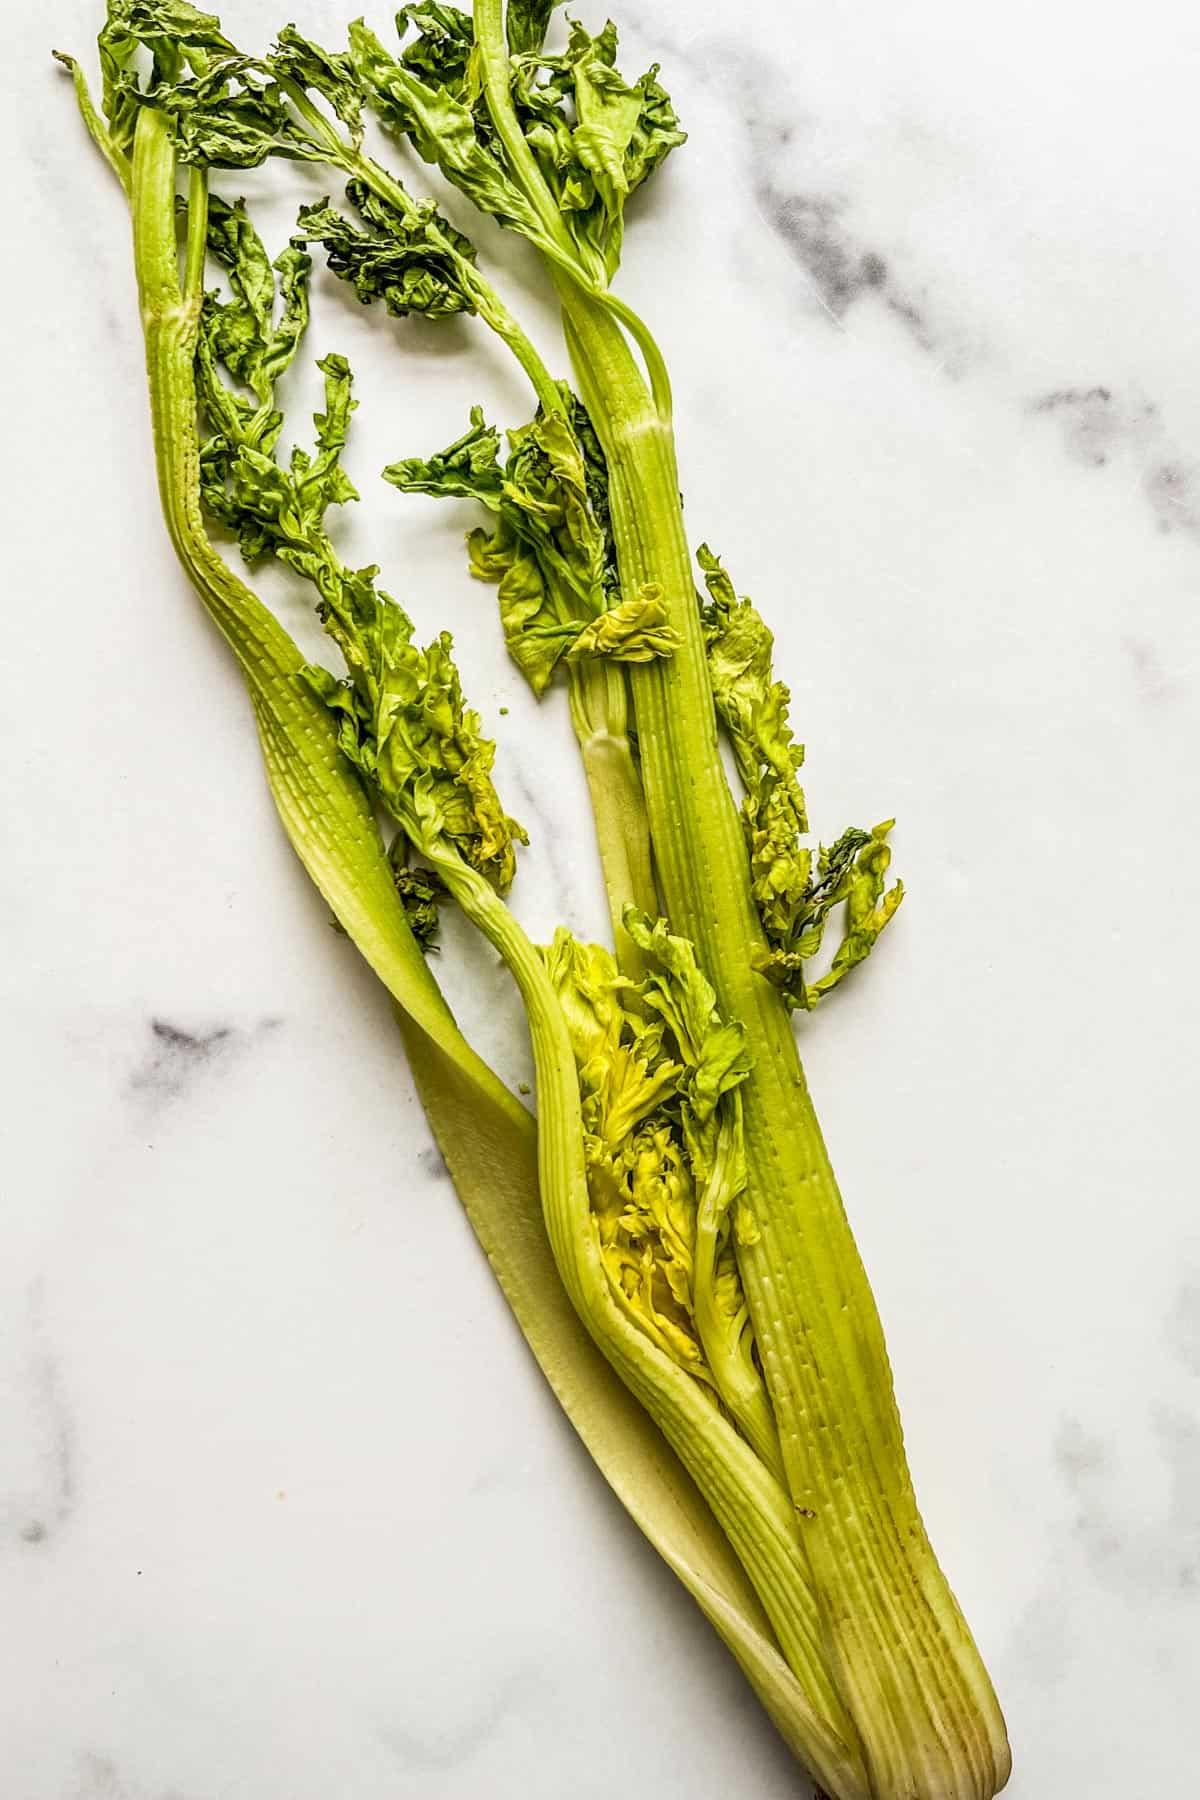 An old head of celery with dry leaves.